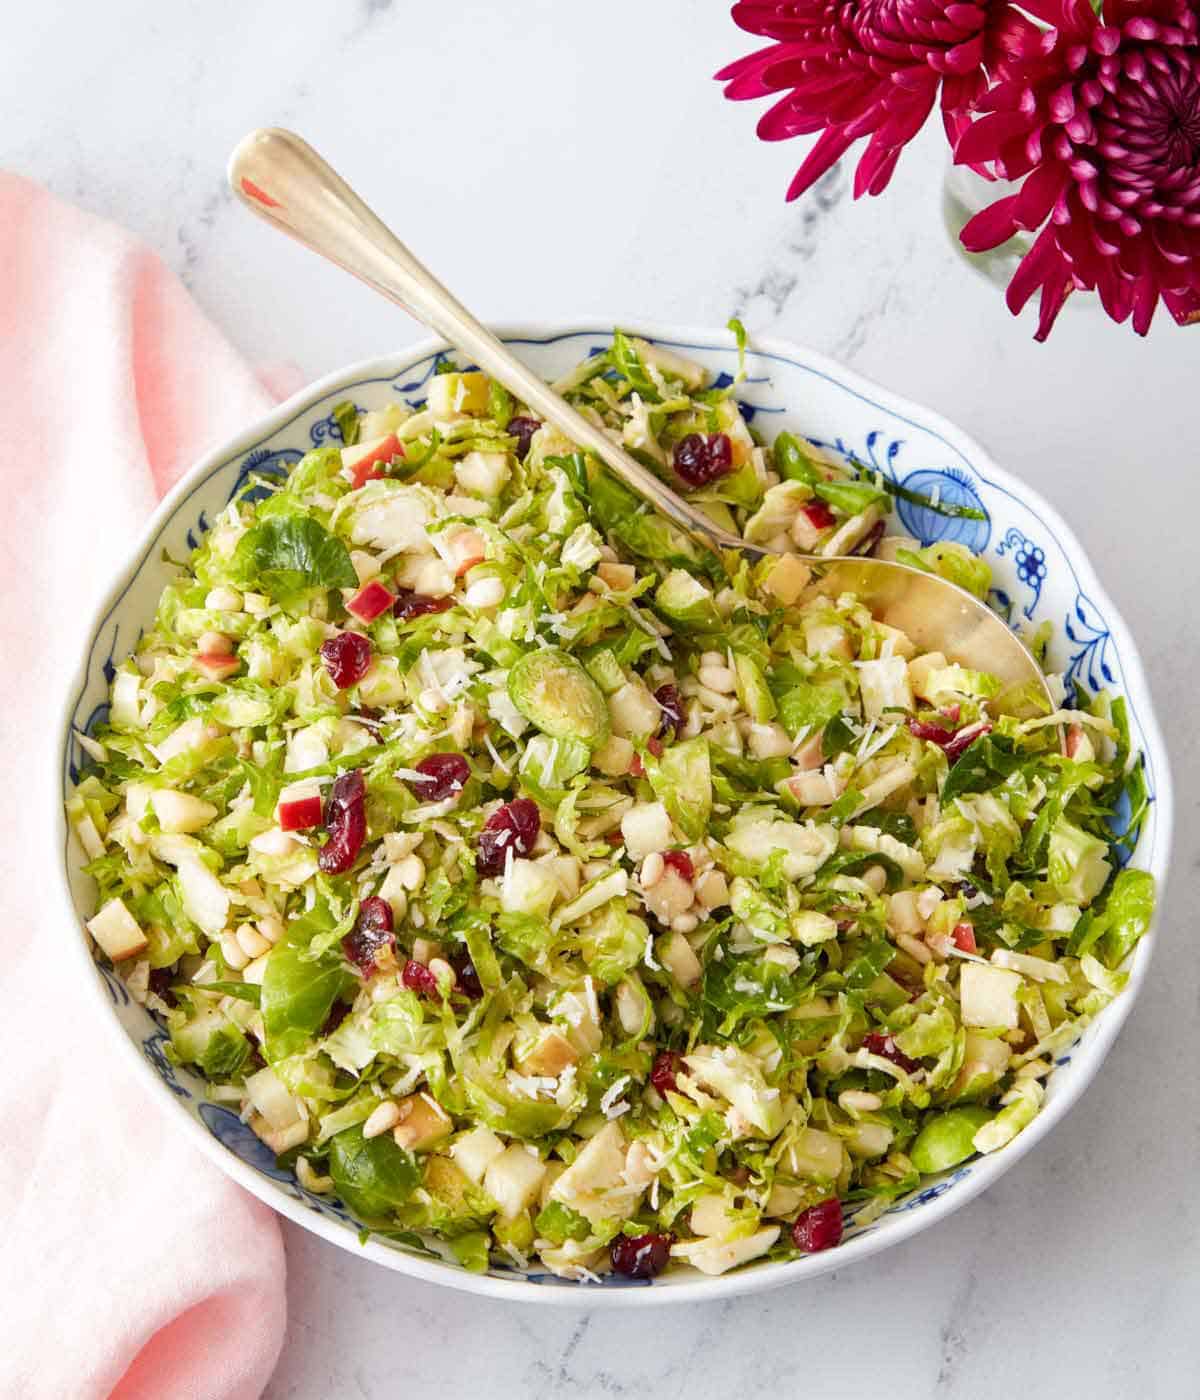 A large bowl of Brussels sprout salad with a serving spoon tucked in.